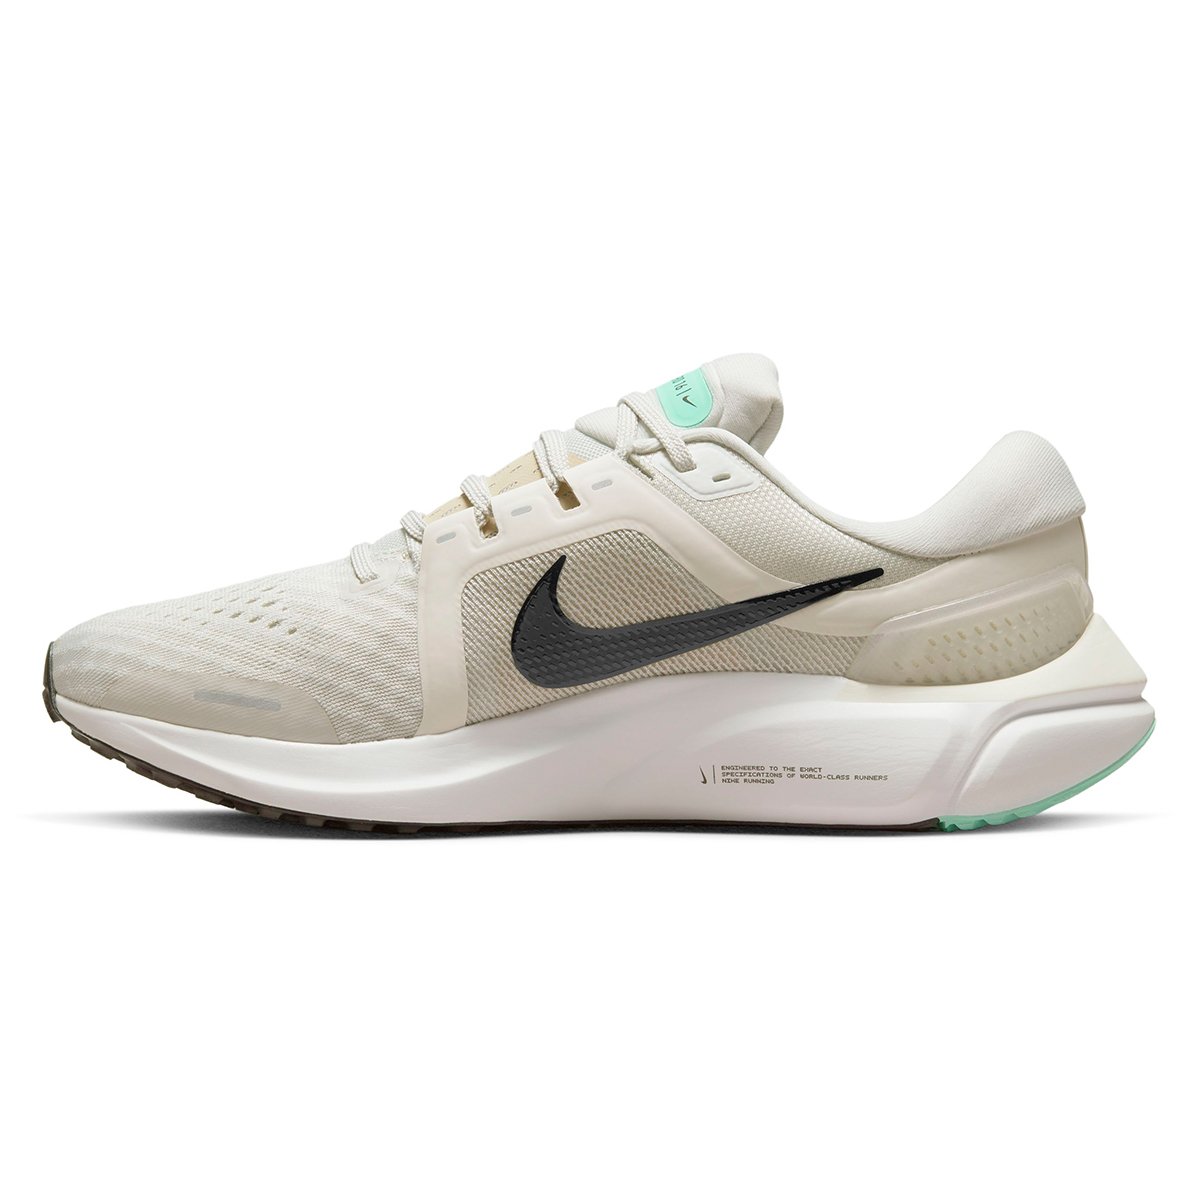 Zapatillas Running Nike Air Zoom Vomero 16 Hombre,  image number null